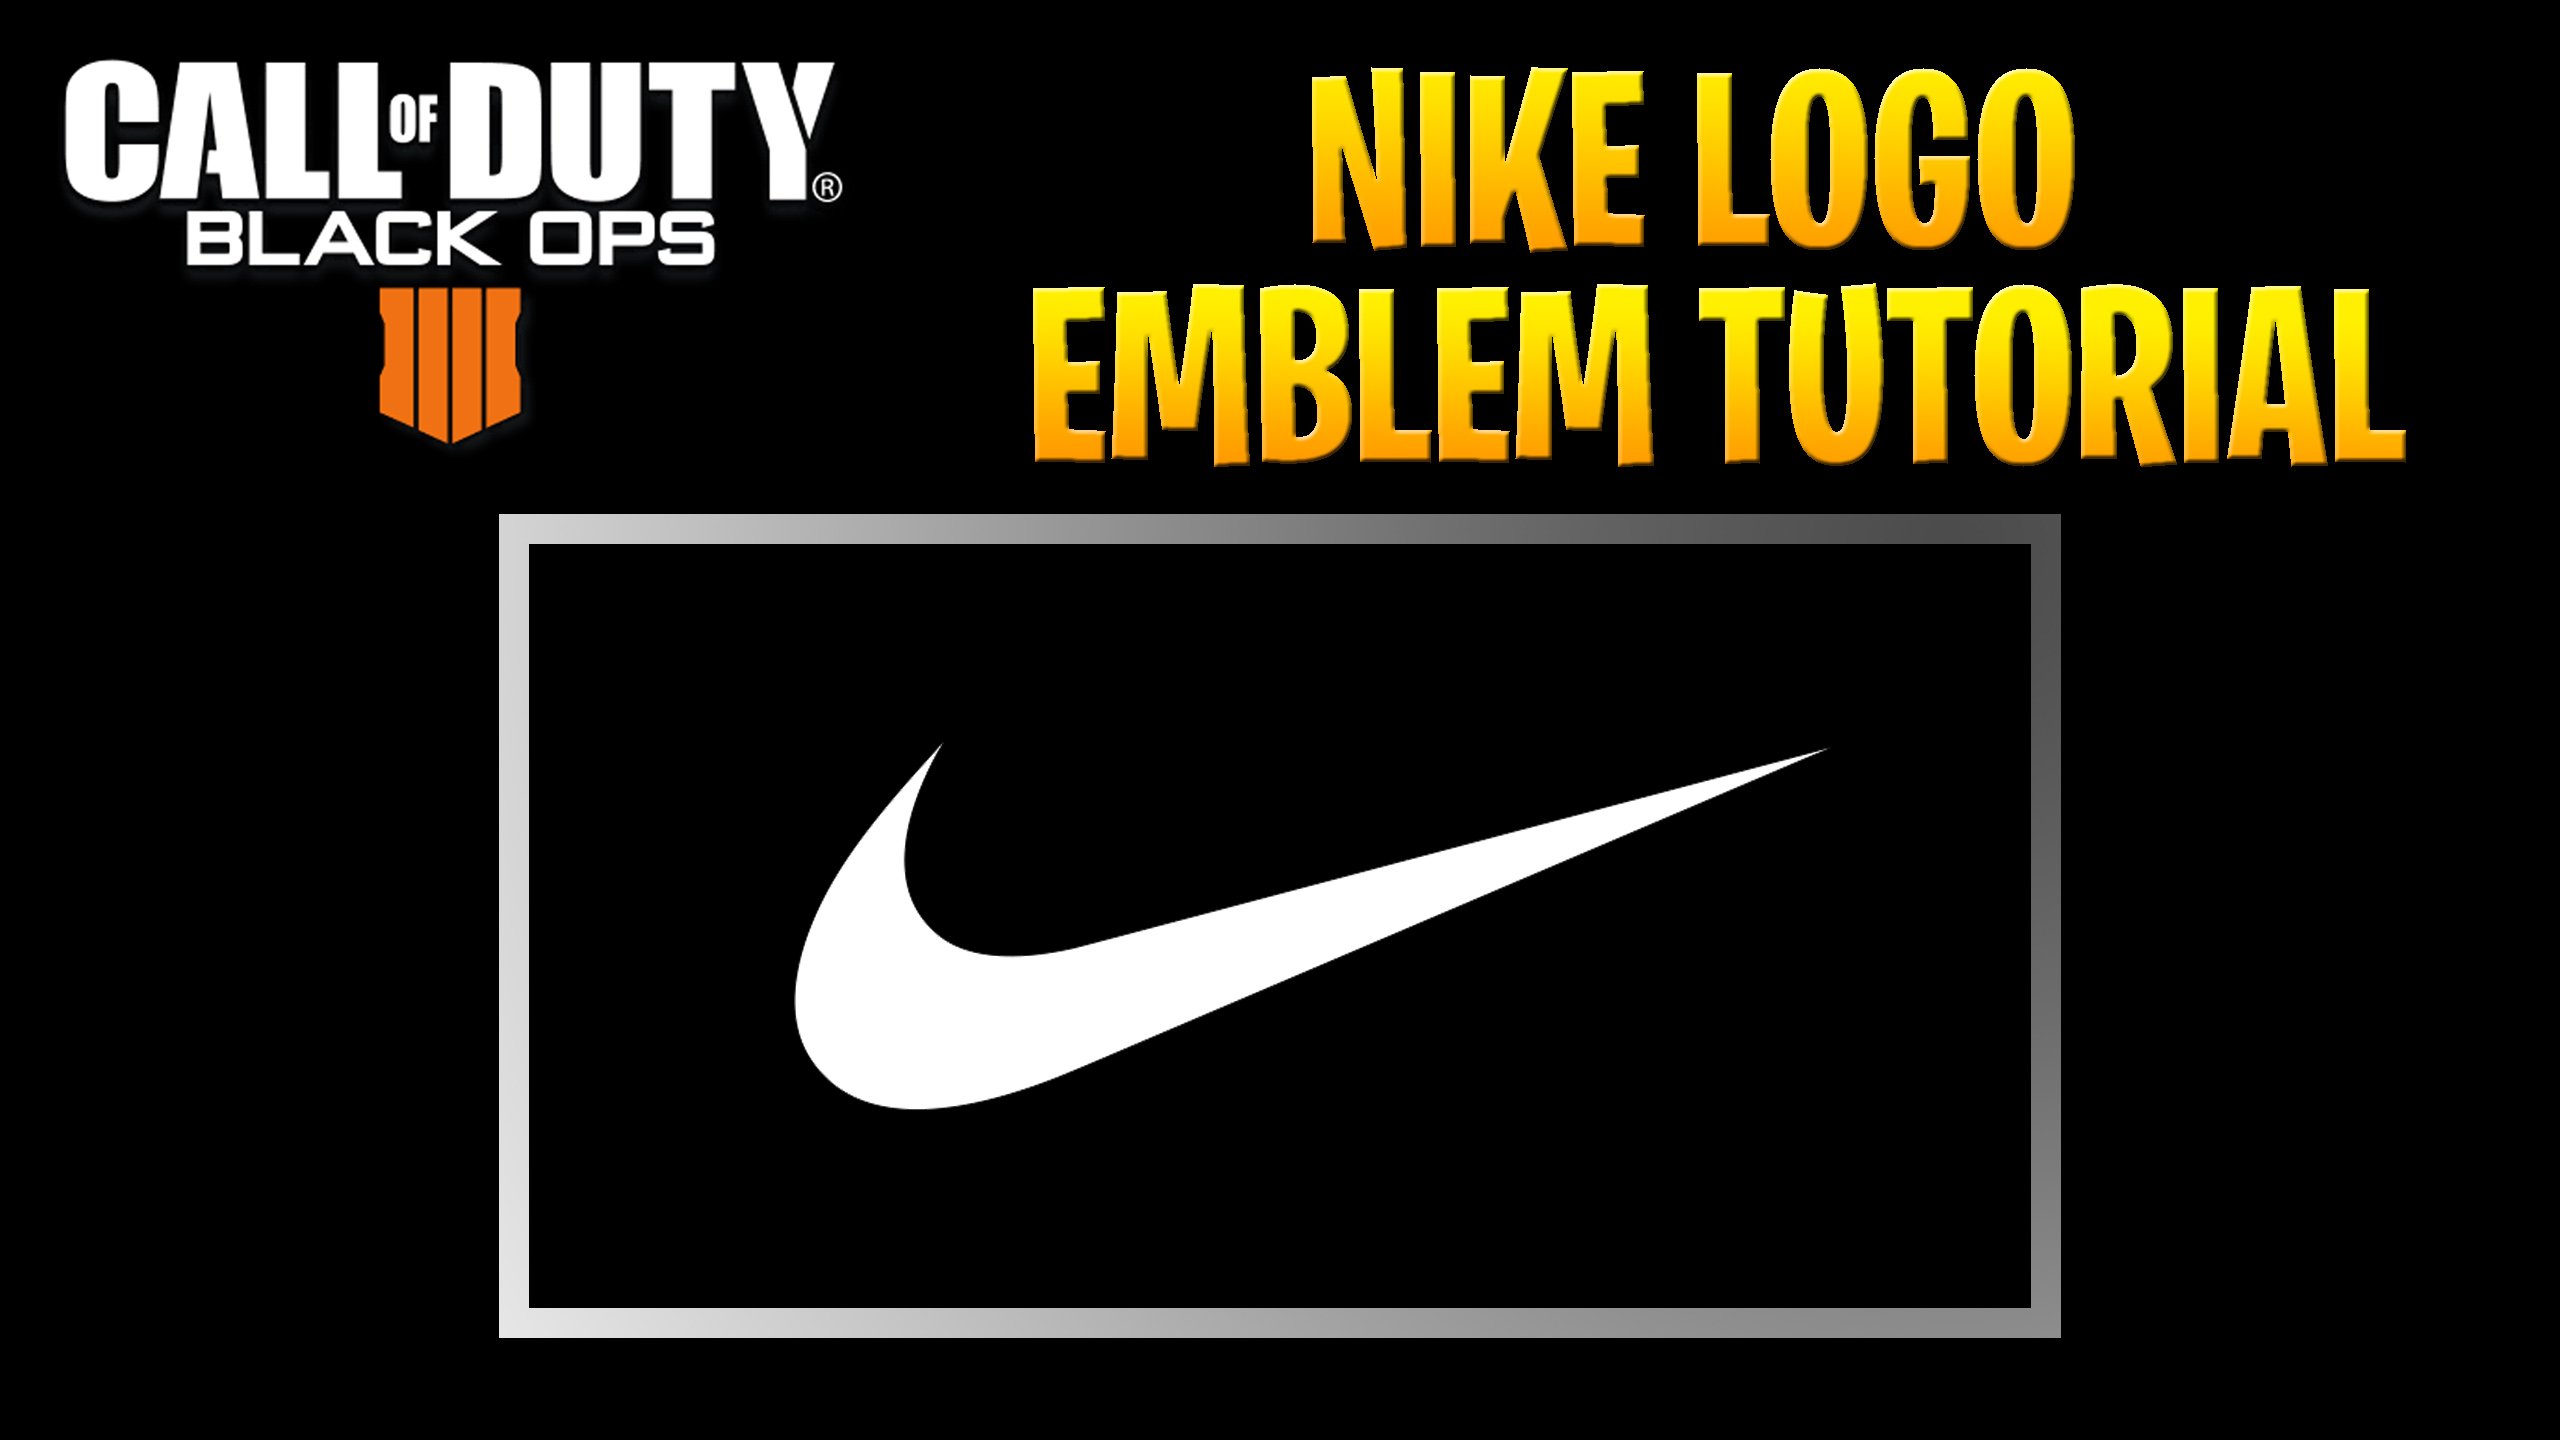 Battlefield 2042 News! Twitterissä: Ops 4: EASY NIKE Emblem Tutorial Just wanted to share this cool emblem I made today! CHECK IT OUT HERE: https://t.co/Bm1Iiz6eYB #bo4 #Bo4Emblem #Blackout #Blackops4giveaway #BlackOps4zombies #BO4Zombies #